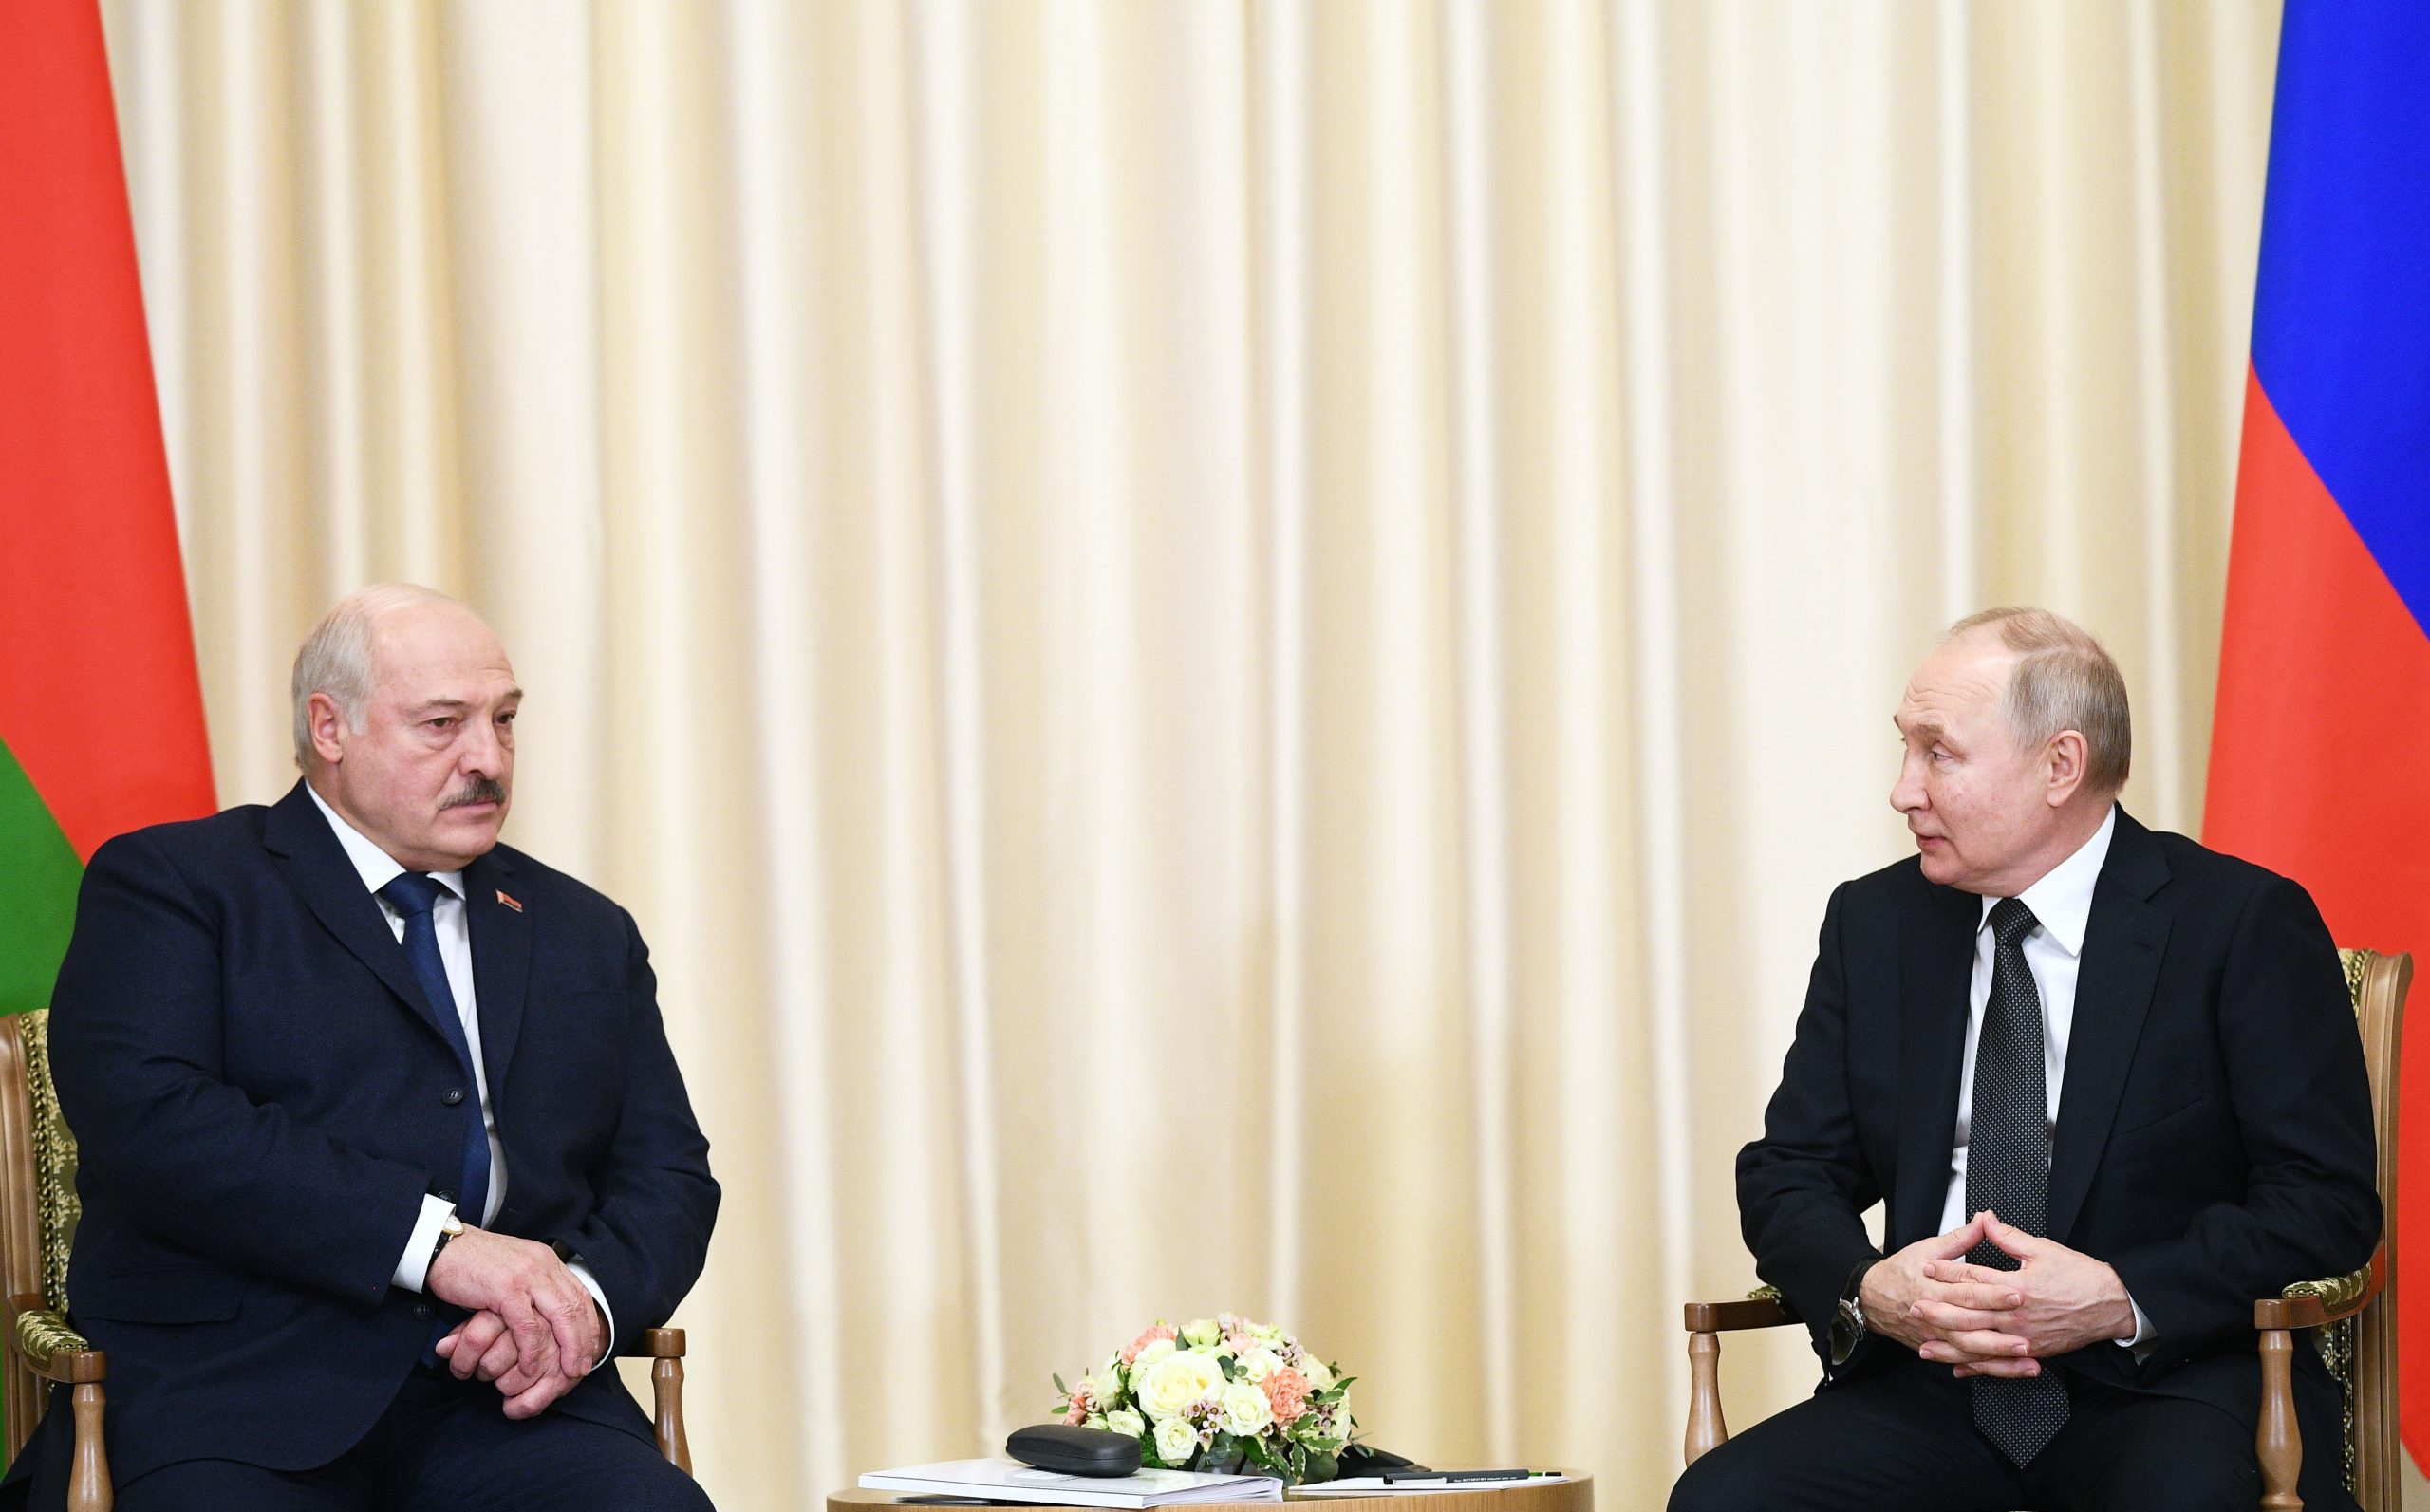 epa10472710 Russian President Vladimir Putin (R) and Belarusian President Alexander Lukashenko during a meeting at the Novo-Ogaryovo state residence, outside Moscow, Russia, 17 February 2023. Belarus fulfills 100 percent of agreements with Russia in the field of defense and security, said President of Belarus Alexander Lukashenko at a meeting with Russian President Vladimir Putin.  EPA/VLADIMIR ASTAPKOVICH/SPUTNIK/KREMLIN POOL / POOL MANDATORY CREDIT